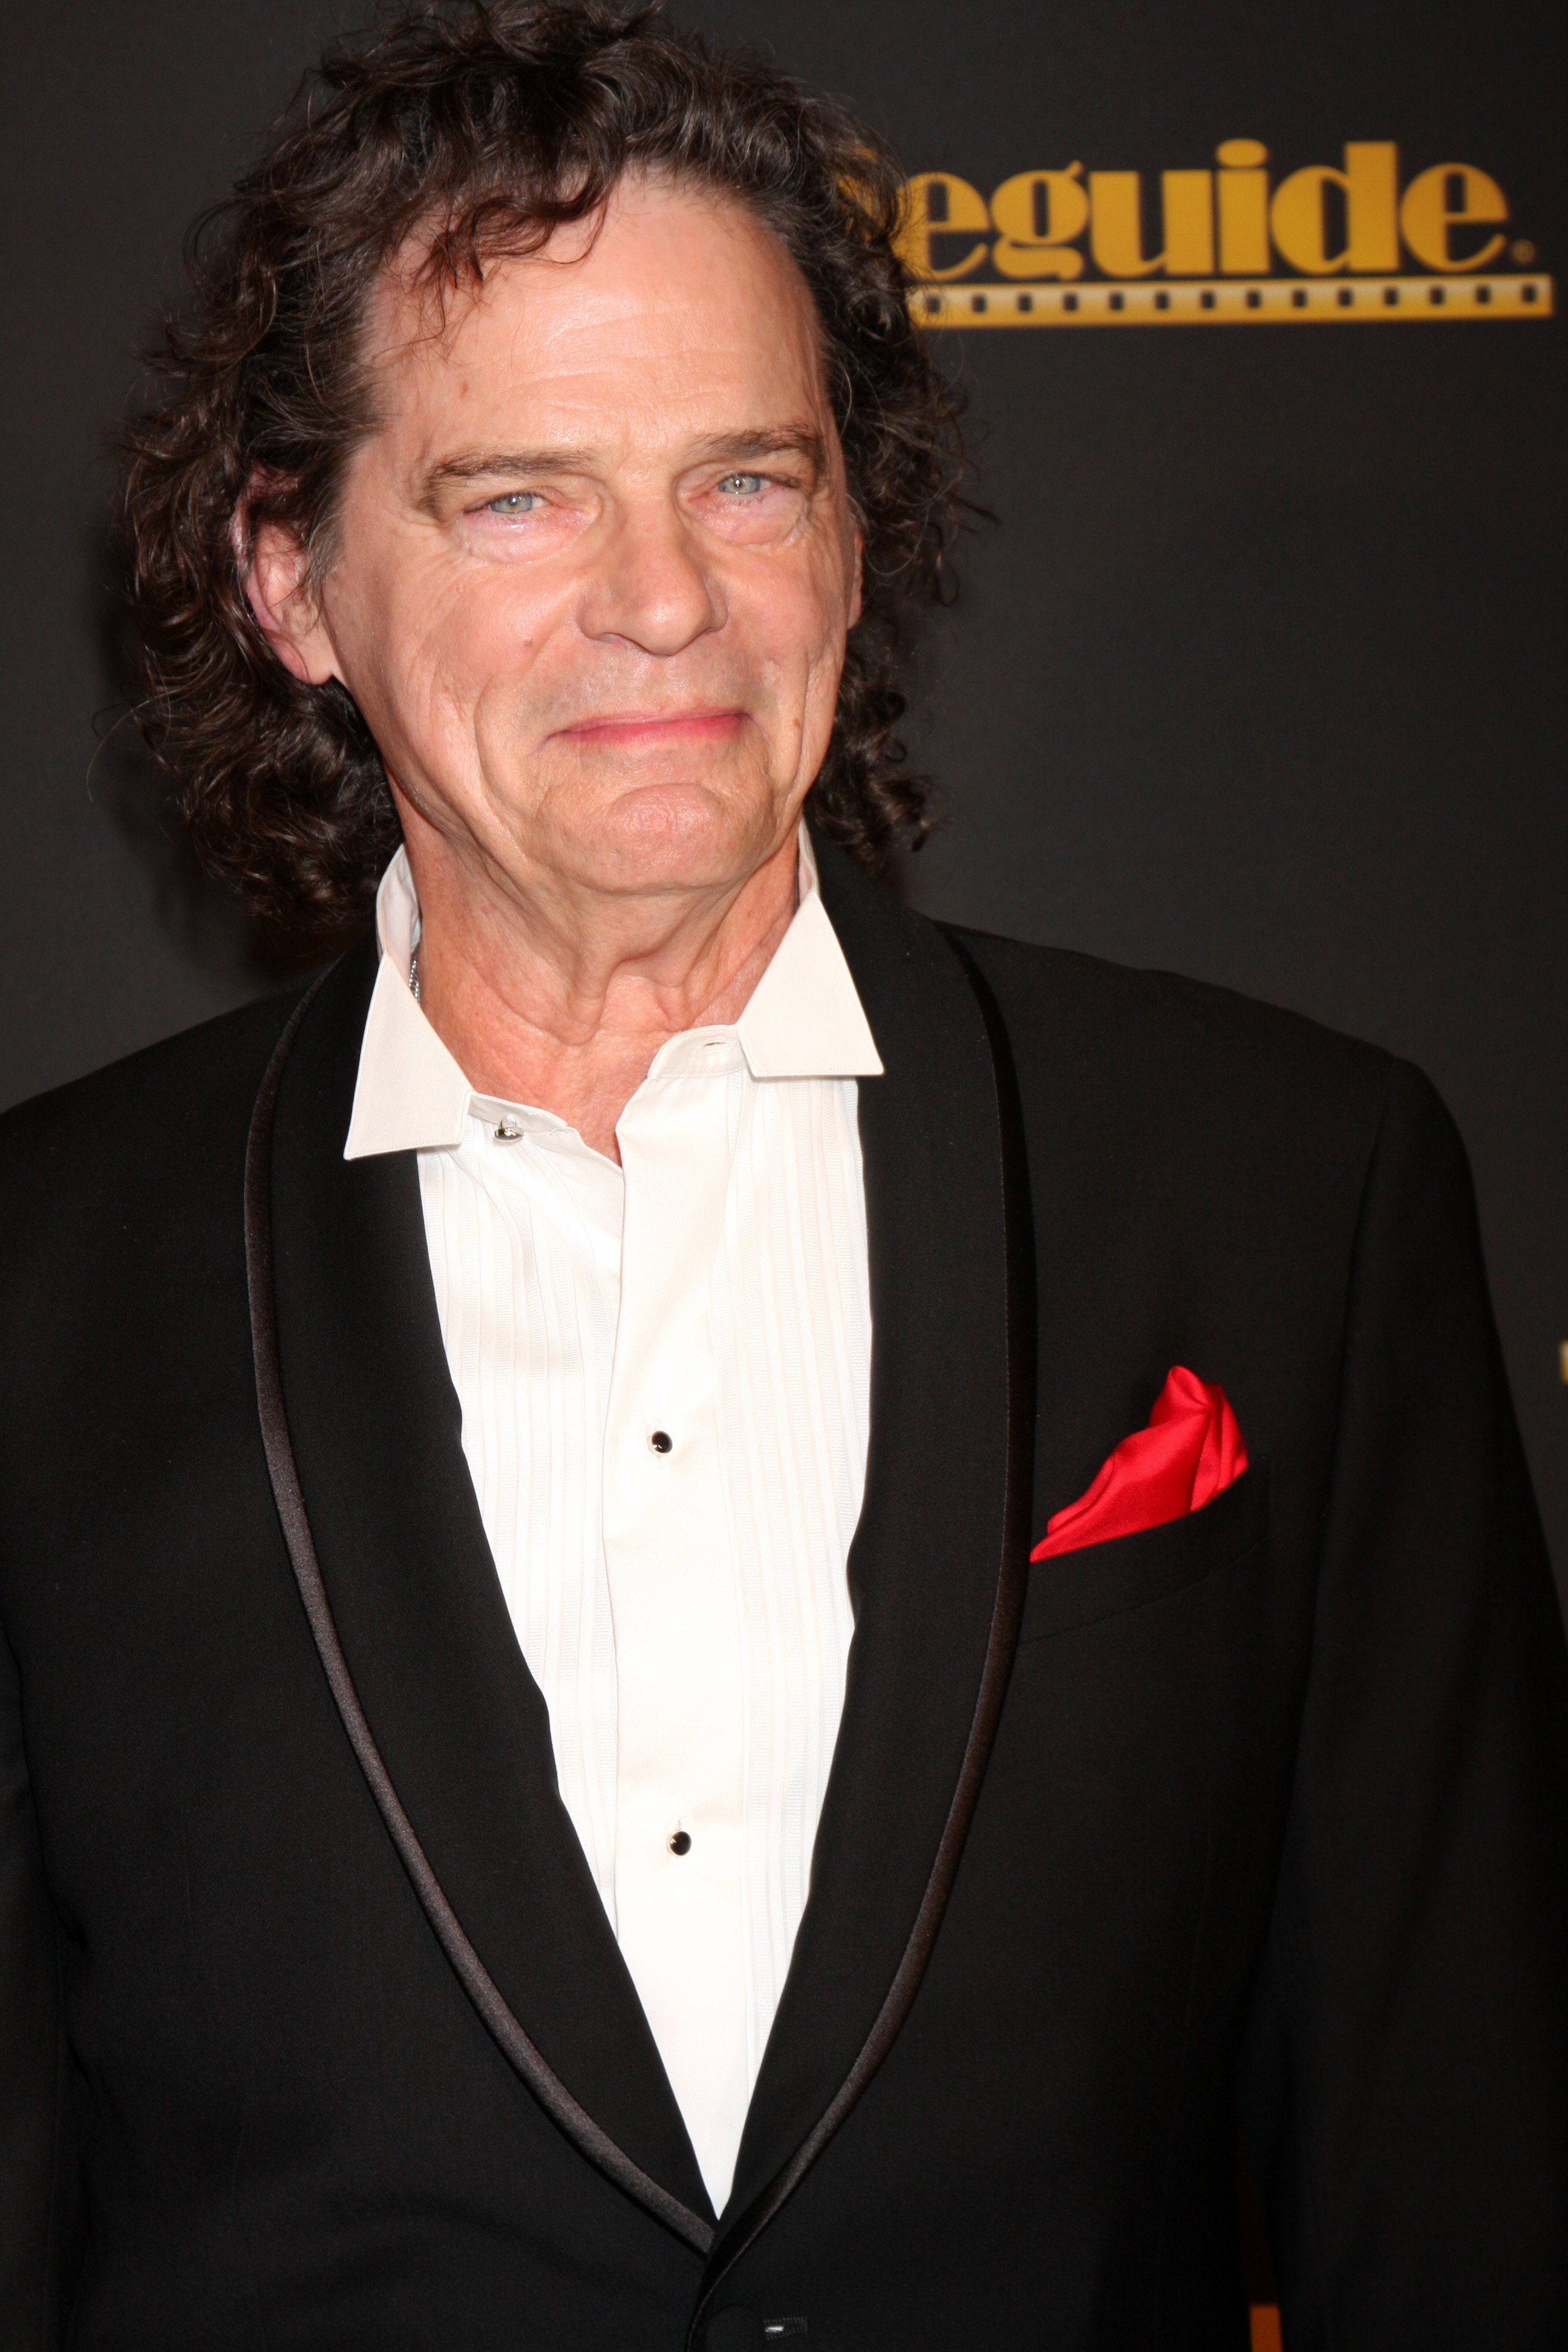 BJ Thomas arrives at the 2012 Movieguide Awards at Universal Hilton Hotel on February 10, 2012 in Universal City, CA | Photo: Shutterstock